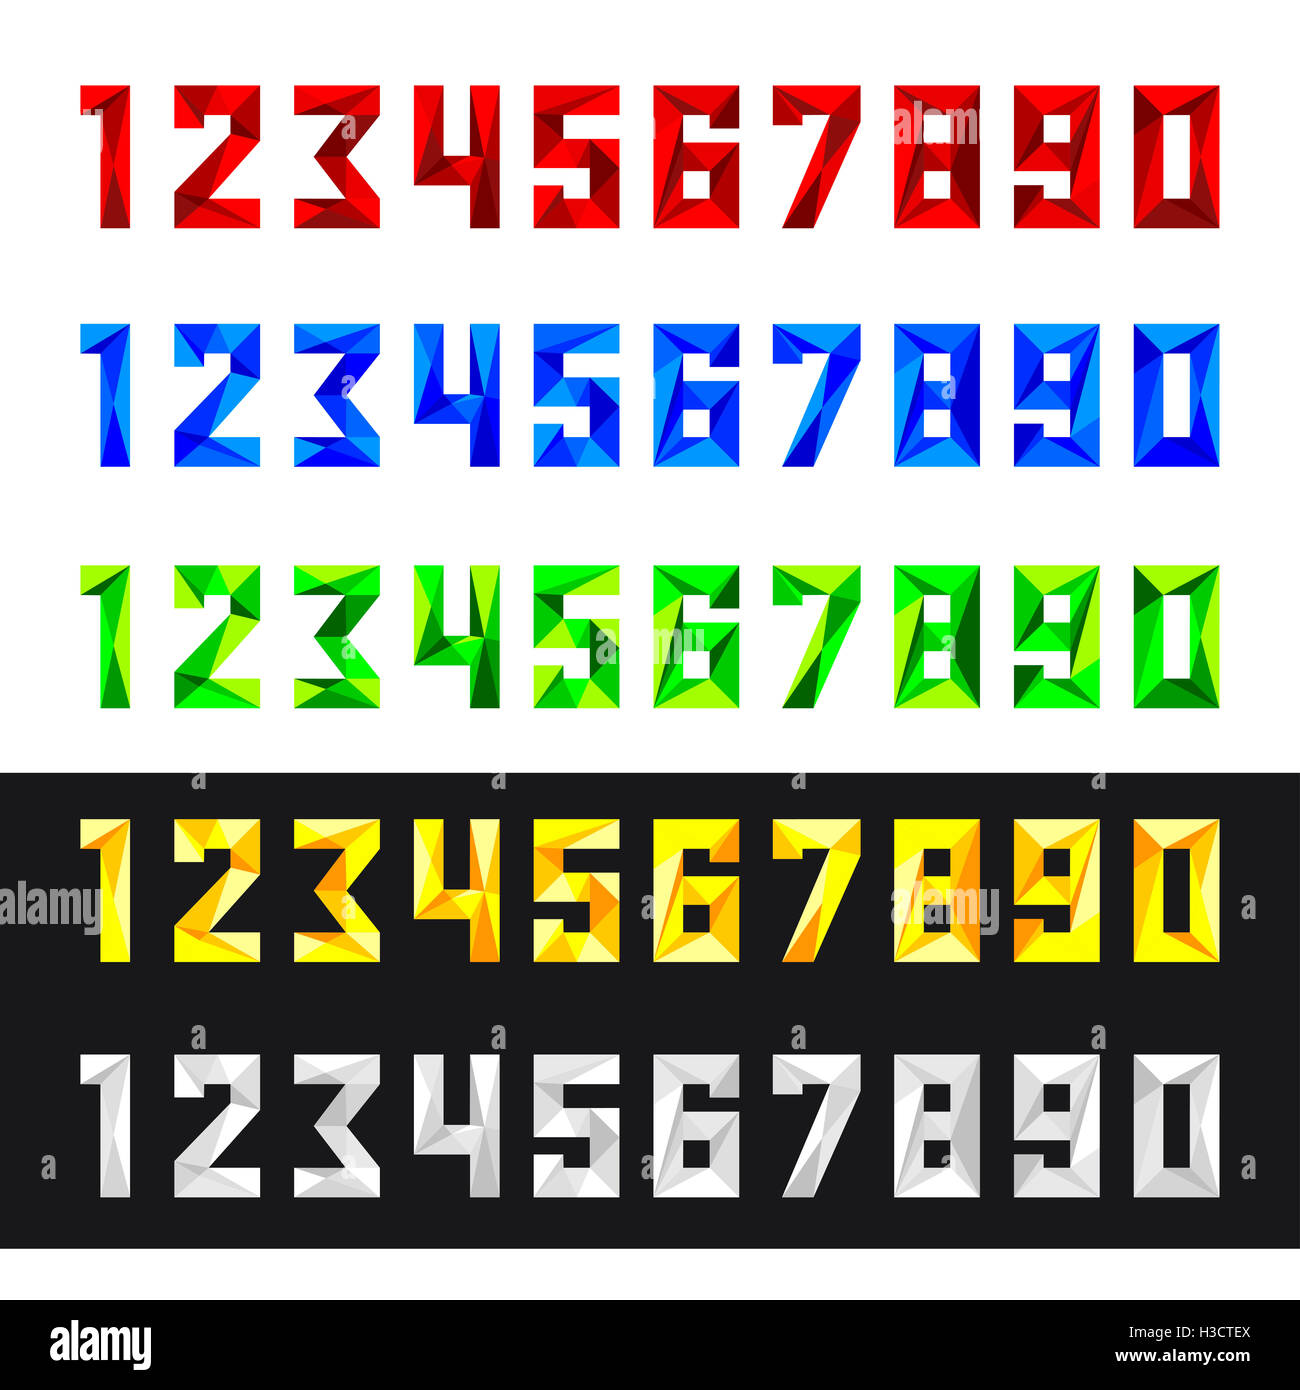 Figures 1, 2, 3, 4, 5, 6, 7, 8, 9, 0 in vector format. Set of numbers from 0 to 9 in polygonal style. Numeric set in five colour Stock Photo